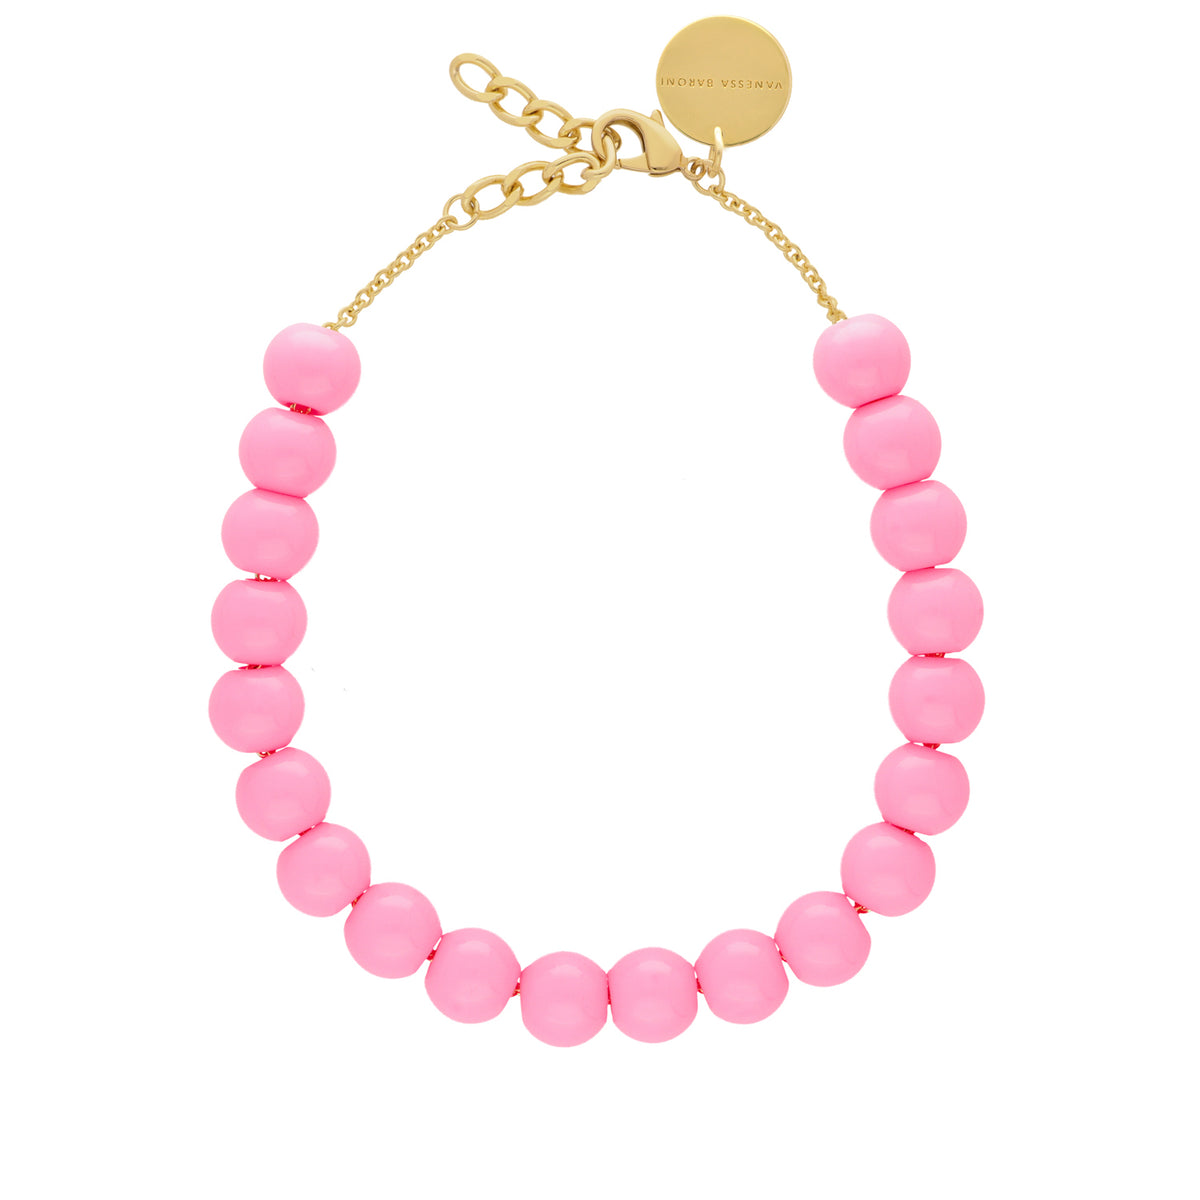 Small Beads Necklace Short Bubble Gum